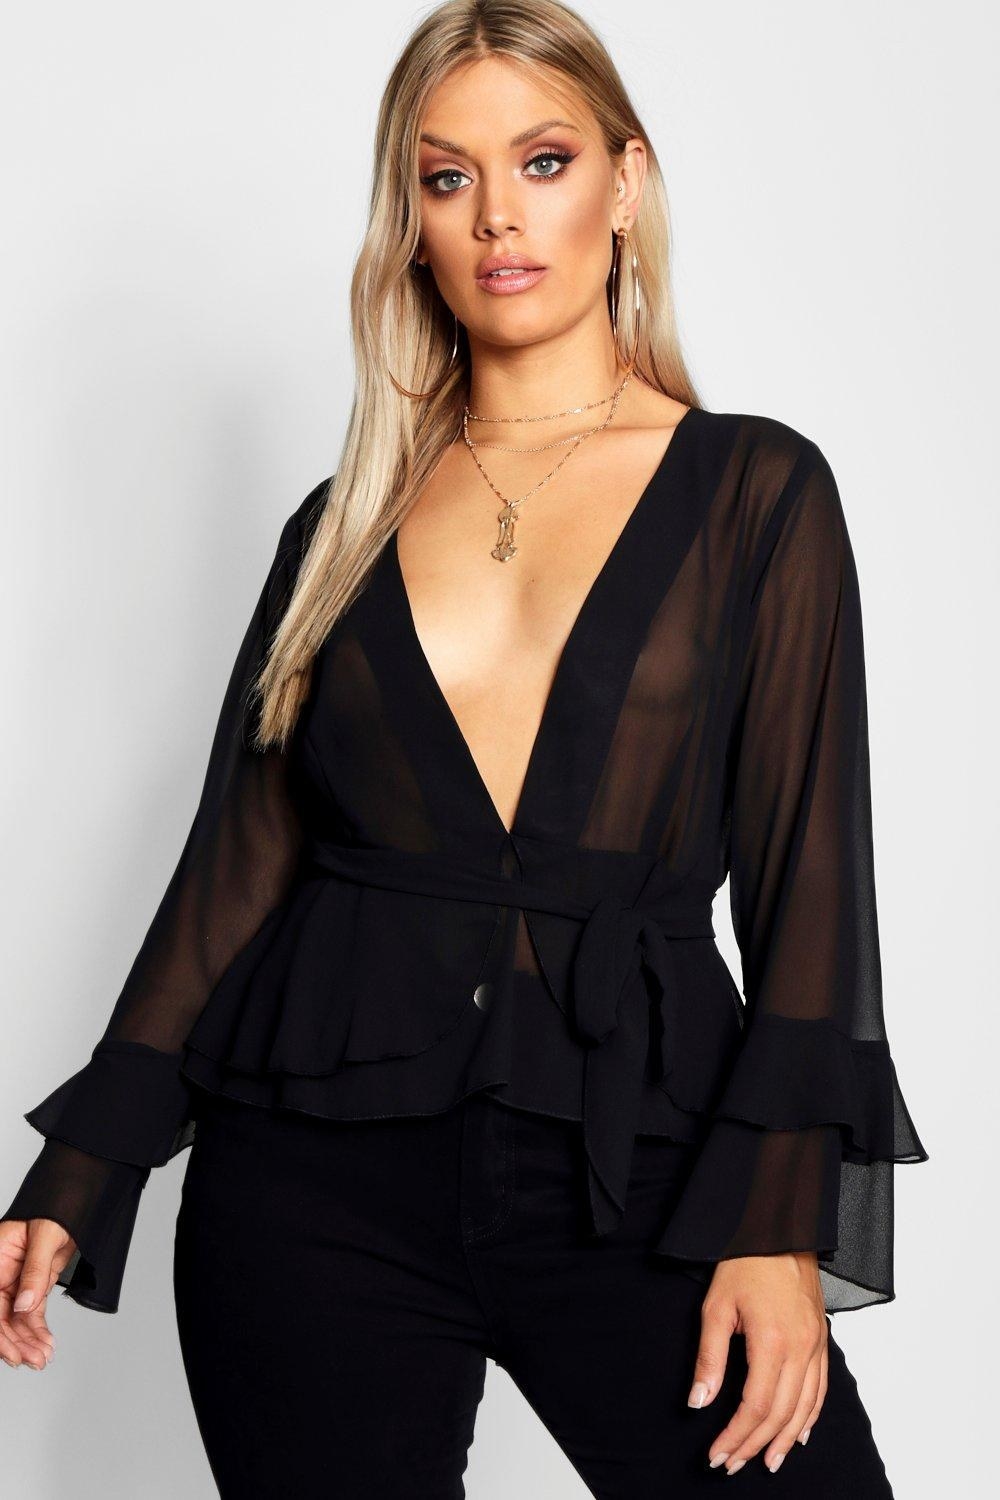 39 Tops You’ll Probably Be Glad You Bought Every Time You Wear Them